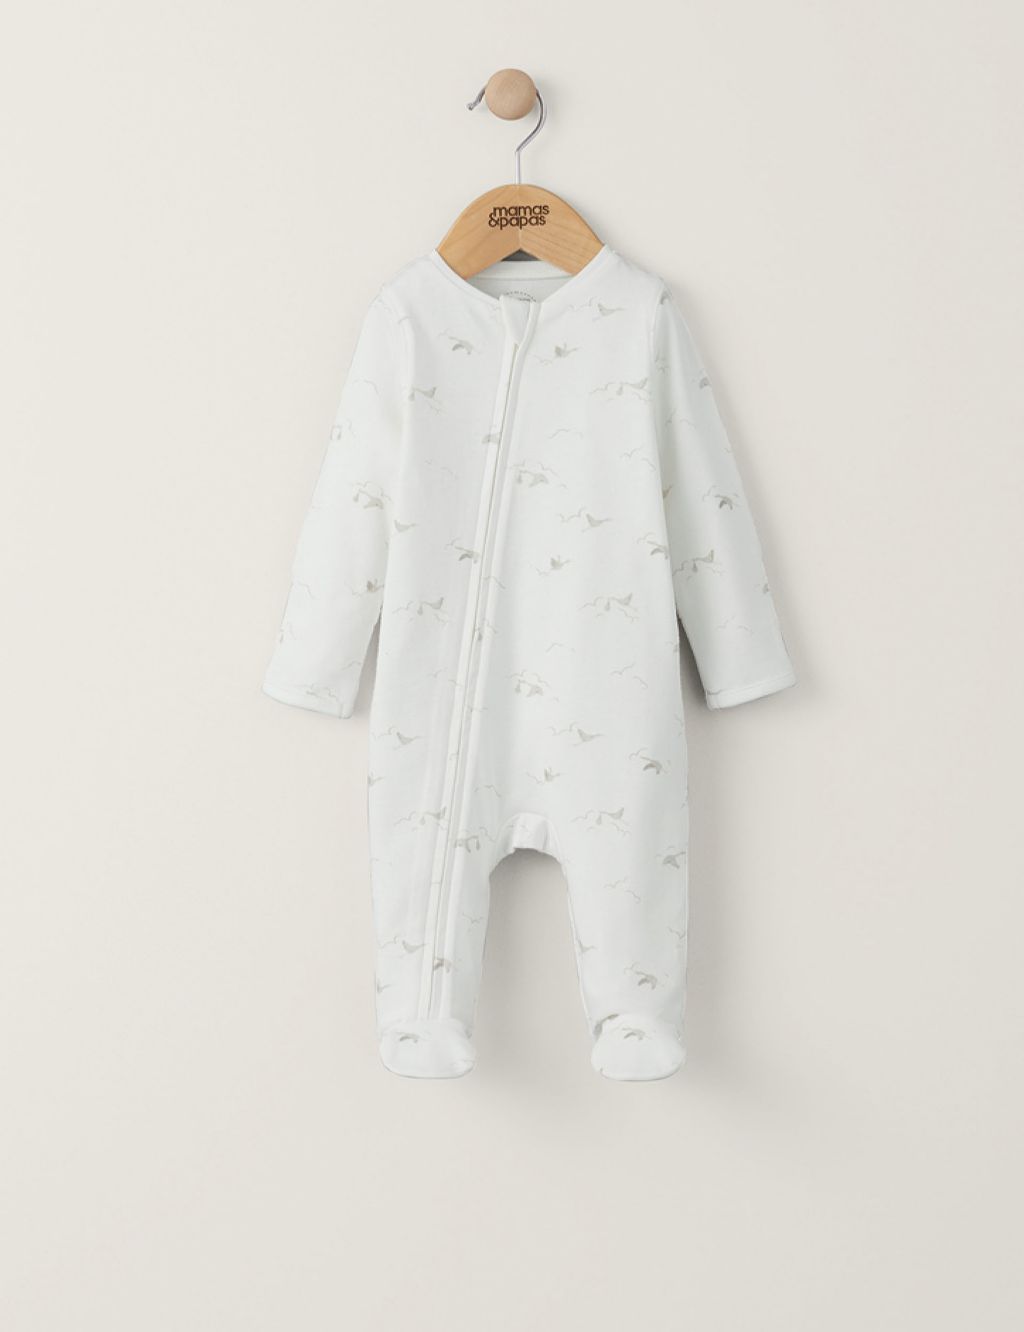 Stork Print Zip All In One (6½lbs-12 Mths) image 5